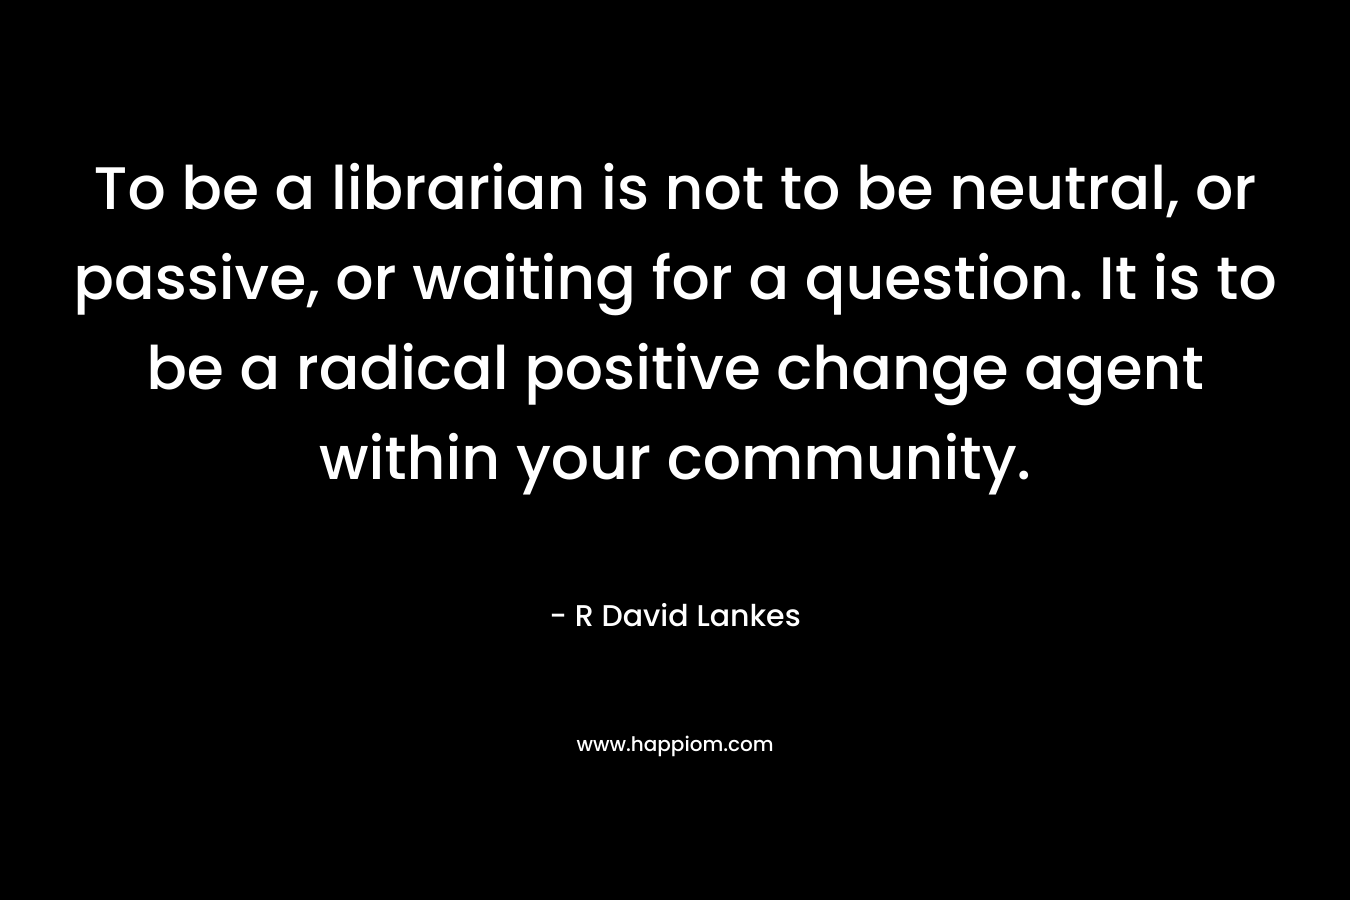 To be a librarian is not to be neutral, or passive, or waiting for a question. It is to be a radical positive change agent within your community. – R David Lankes